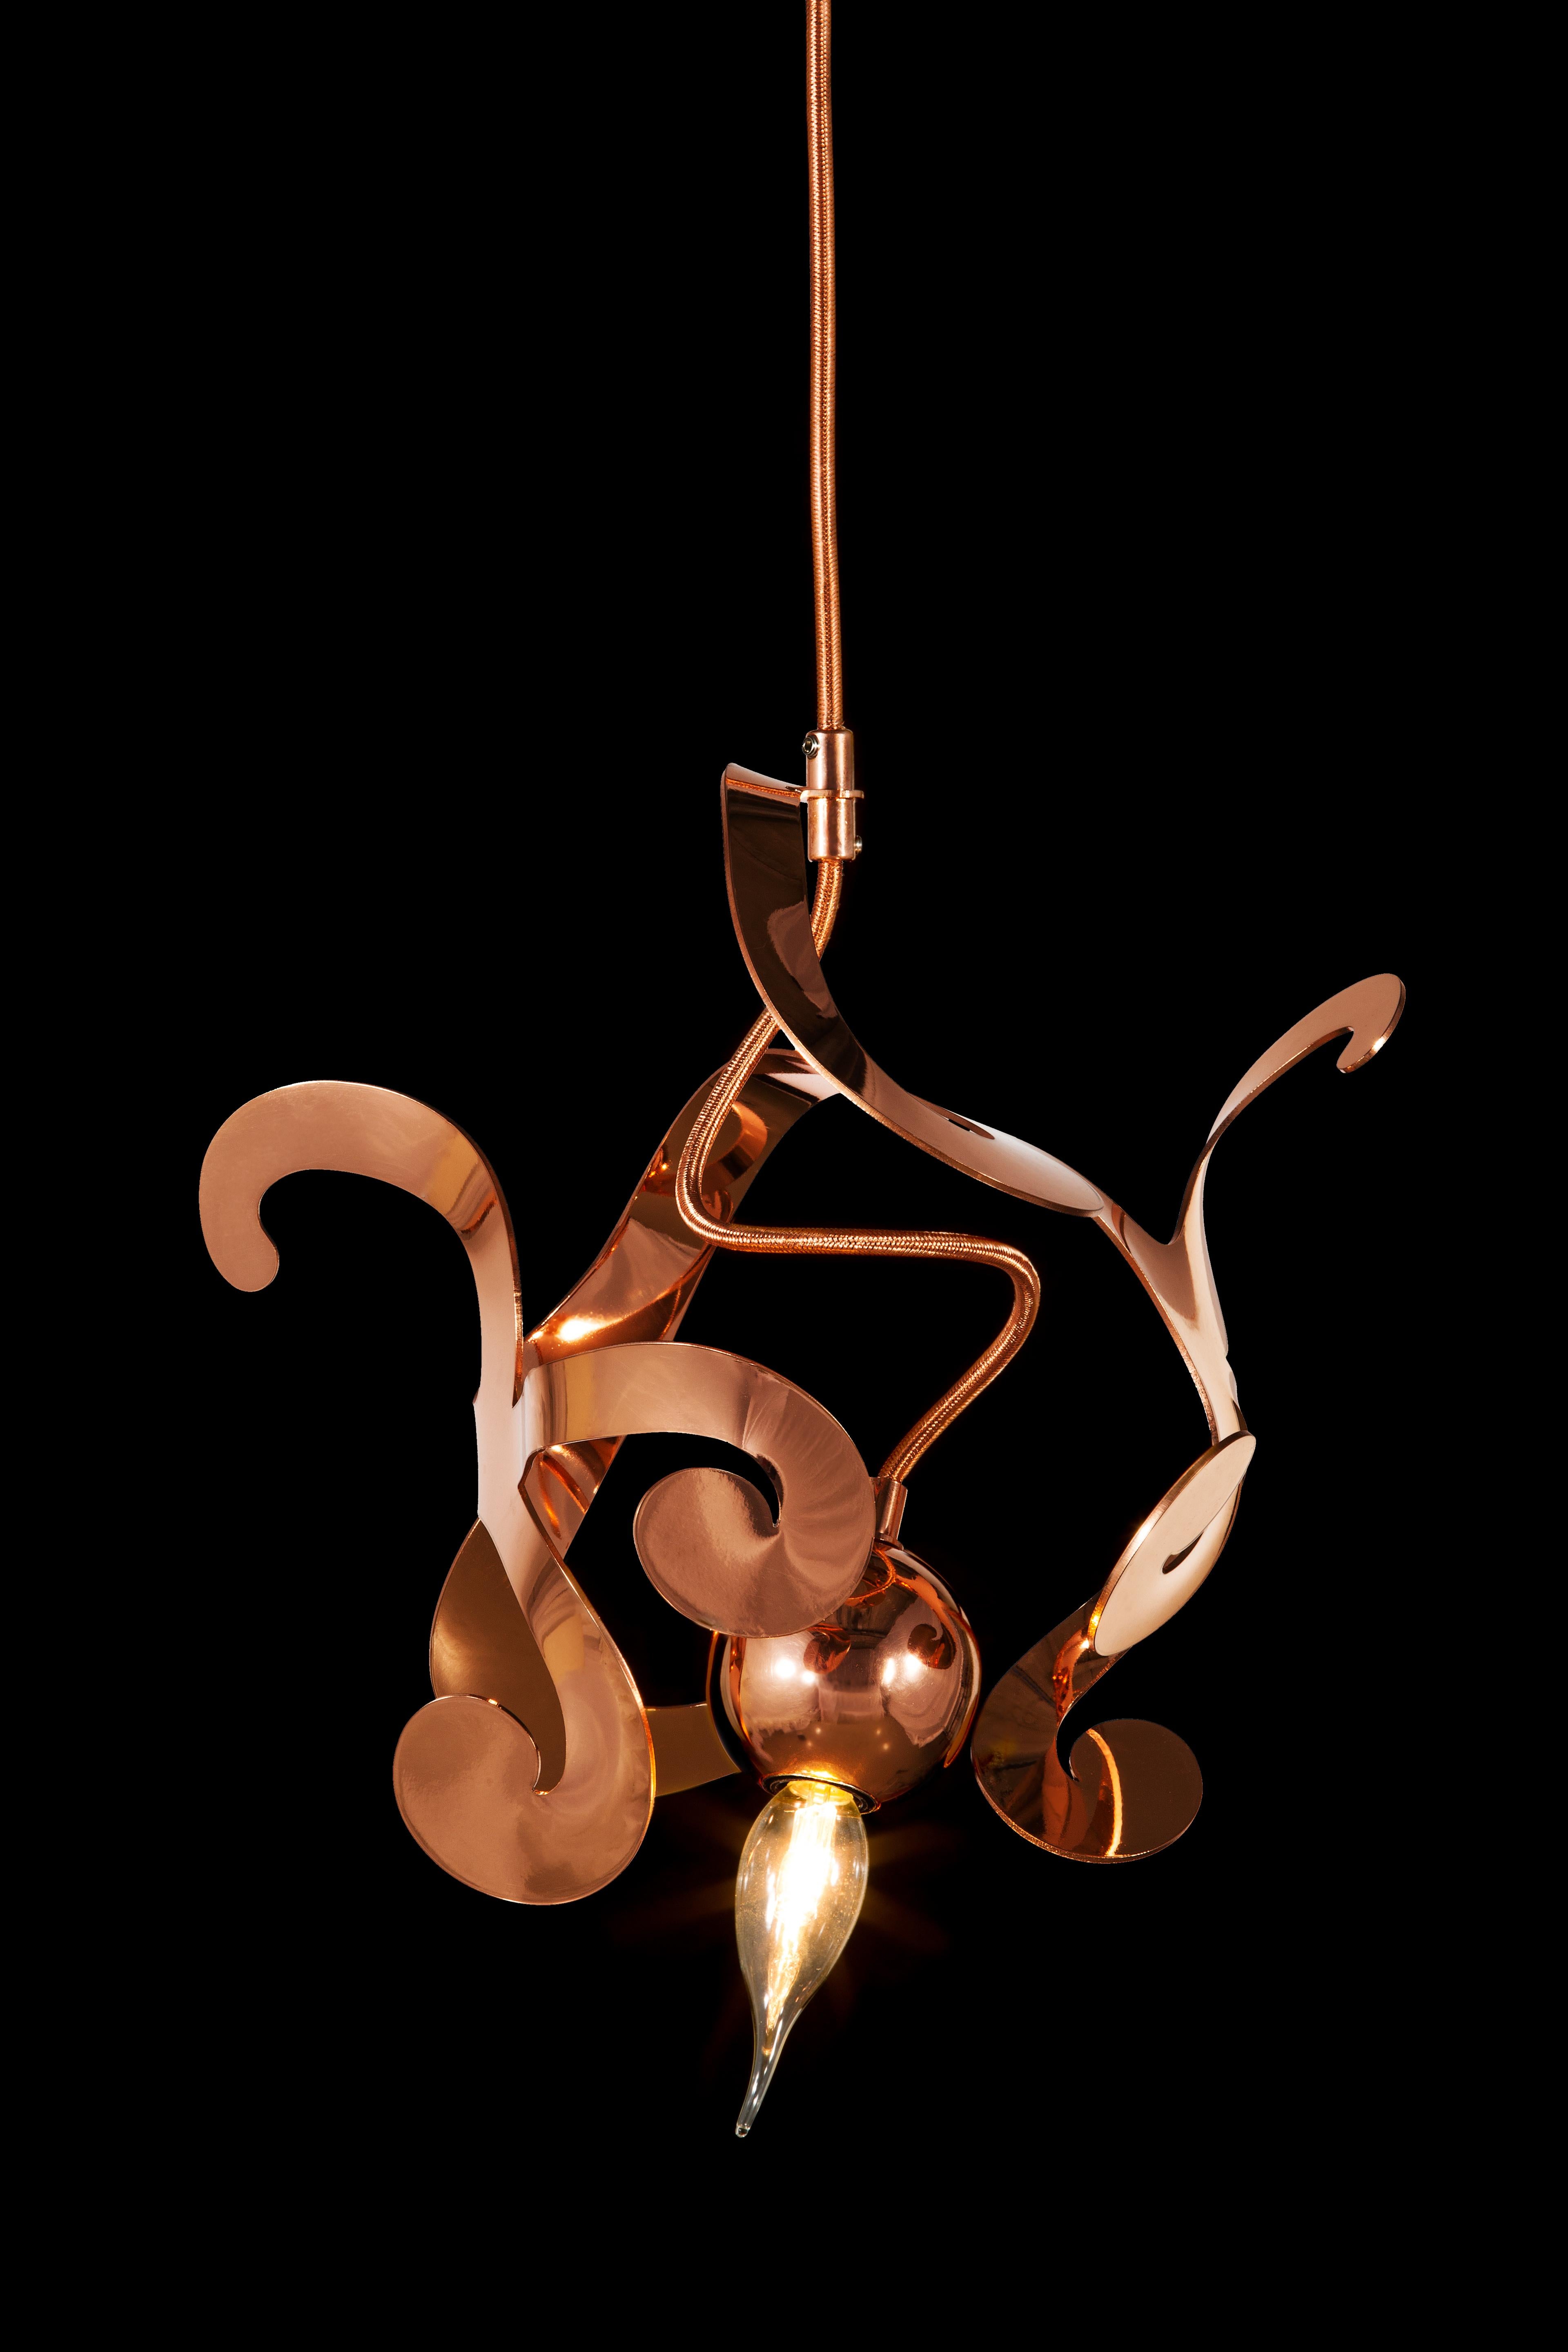 The Kelp modern pendant in a copper finish, designed by William Brand, is a free and playful organic lighting sculpture in the collection of Brand van Egmond. The seemingly randomness of the lighting sculpture, yet carefully arranged ornaments will